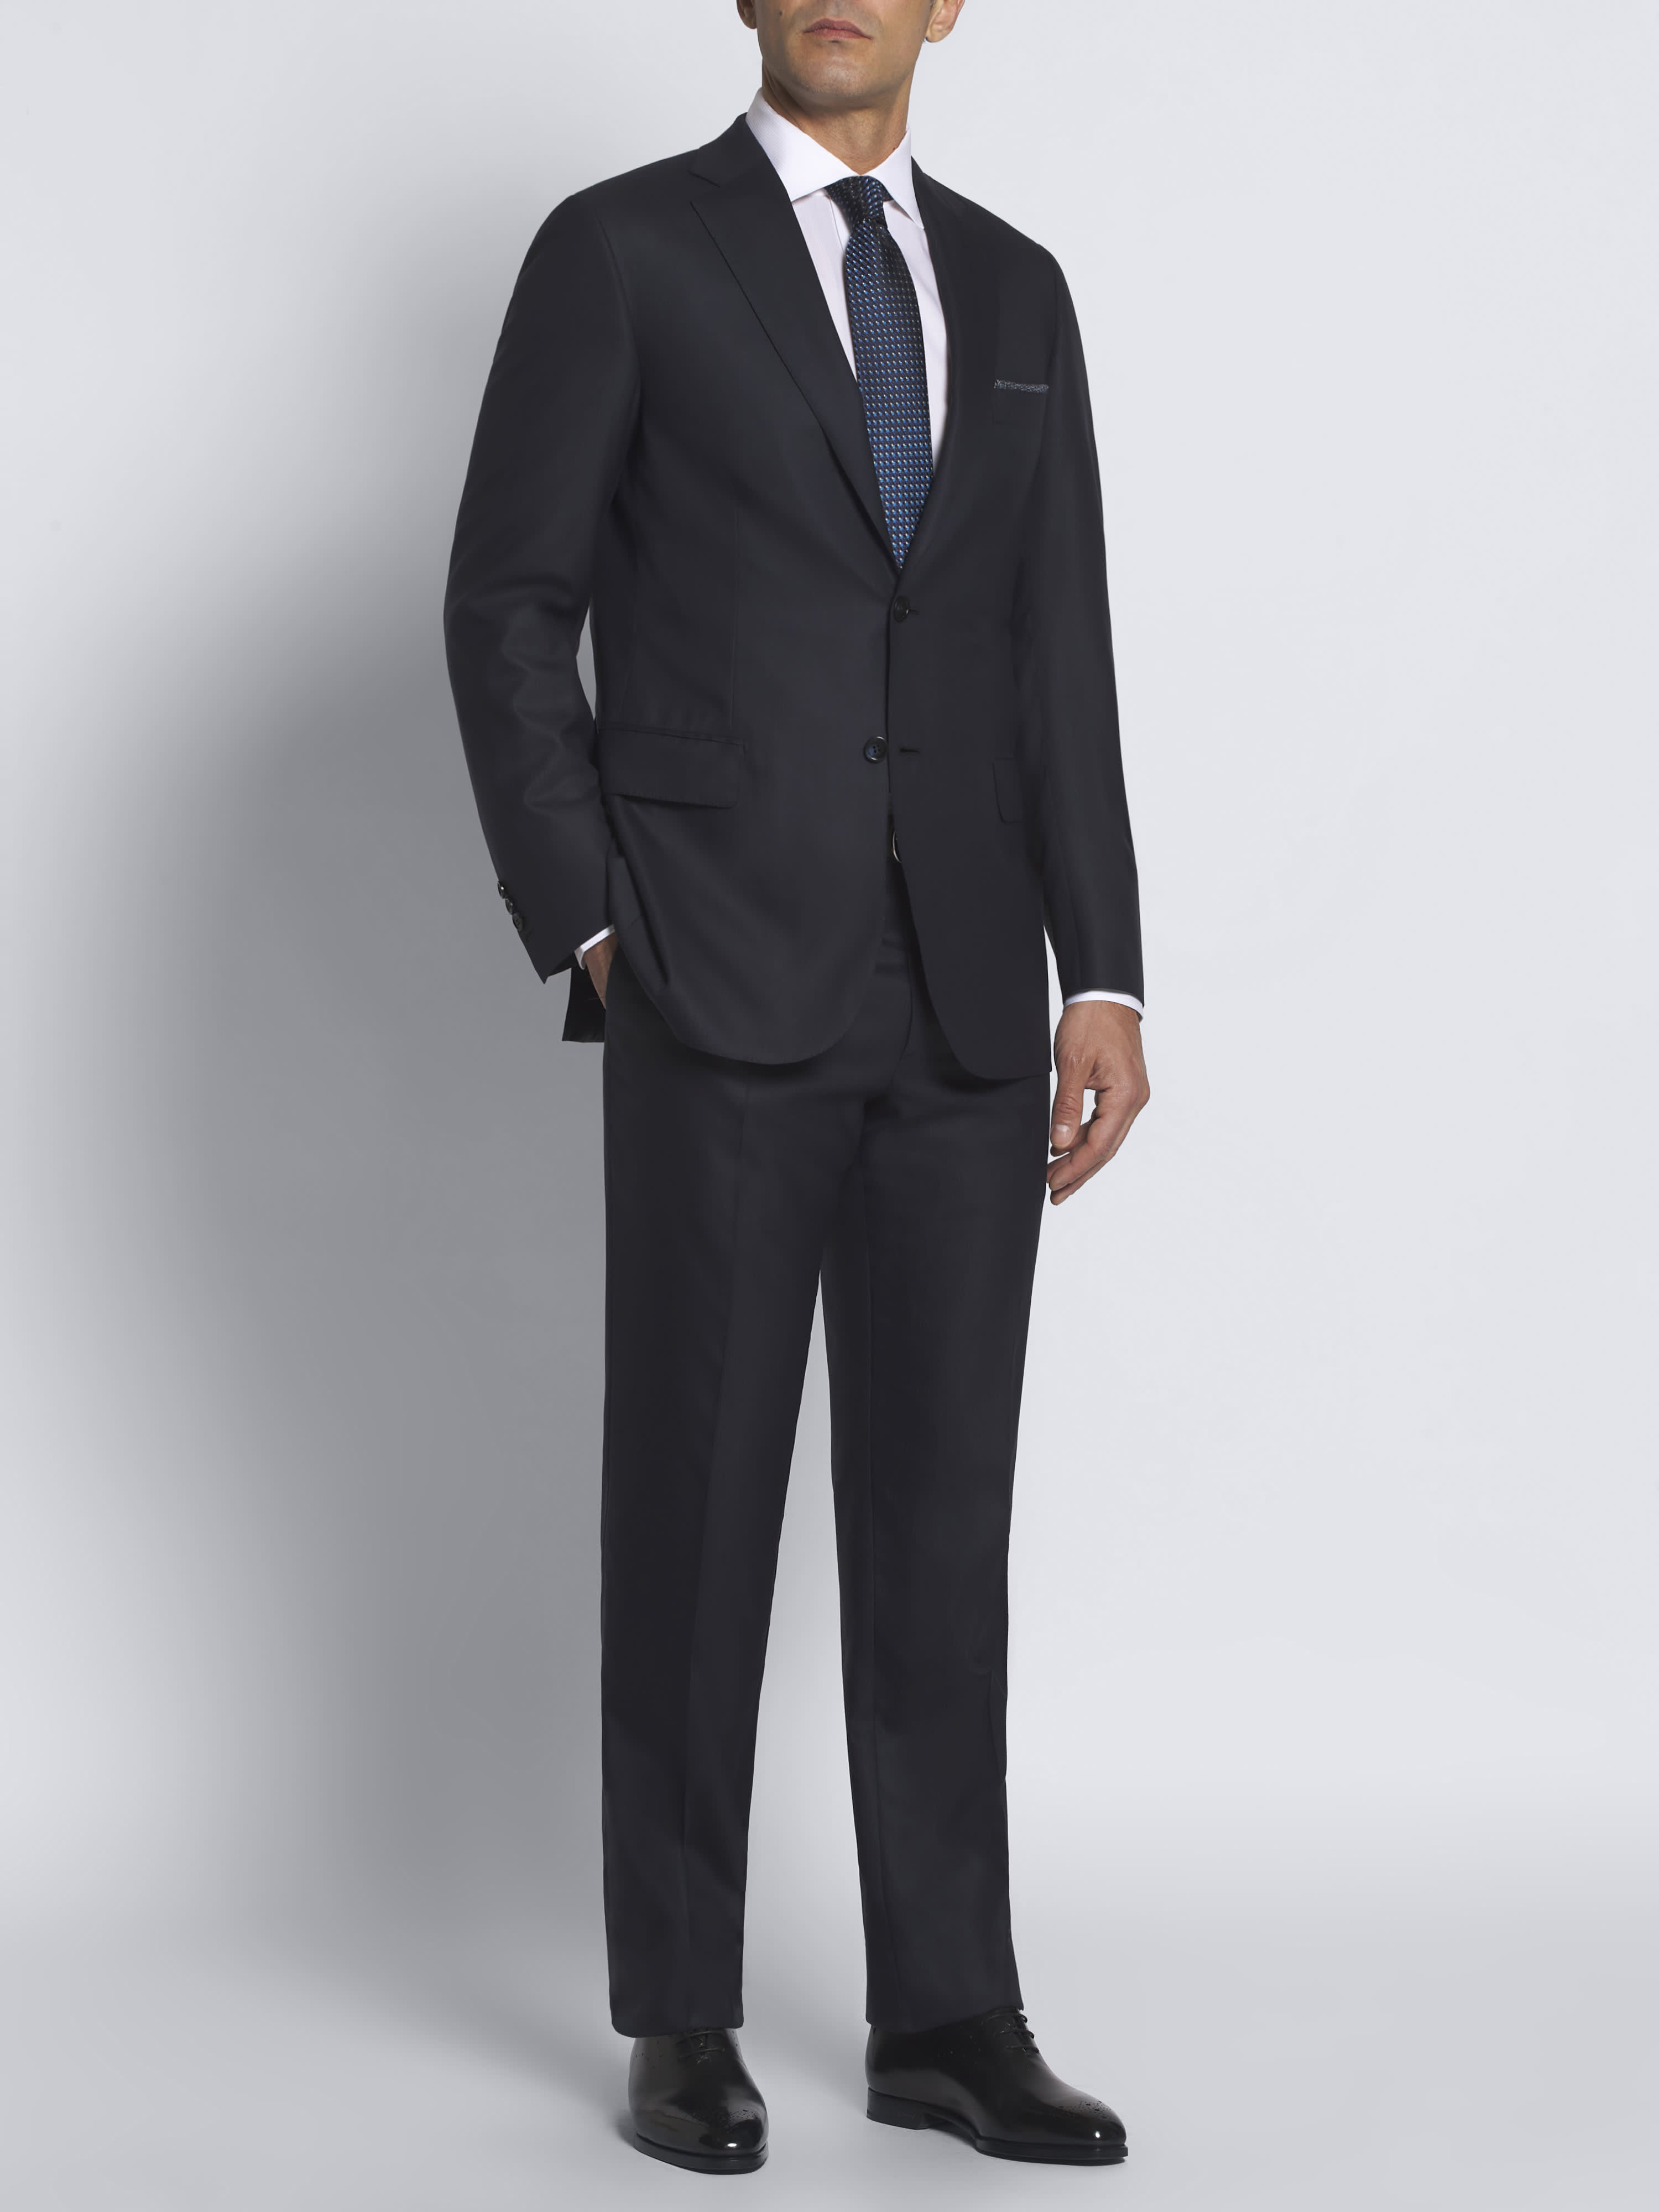 Is Brioni the Best Made Suit? — Bespoke Custom Suits Hand Made in Los  Angeles